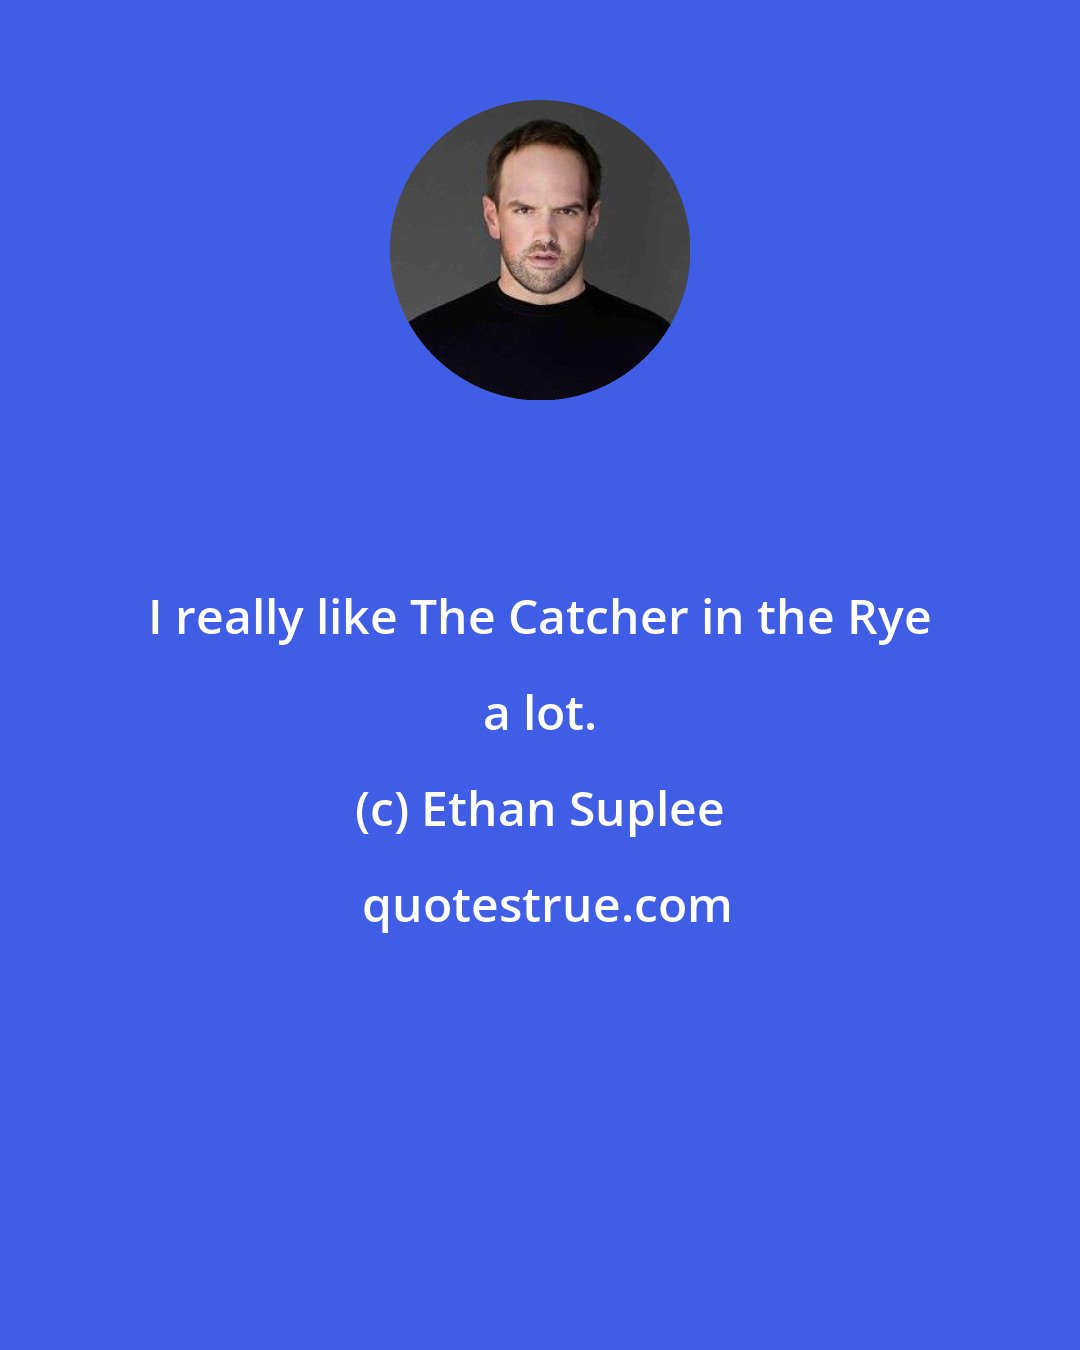 Ethan Suplee: I really like The Catcher in the Rye a lot.